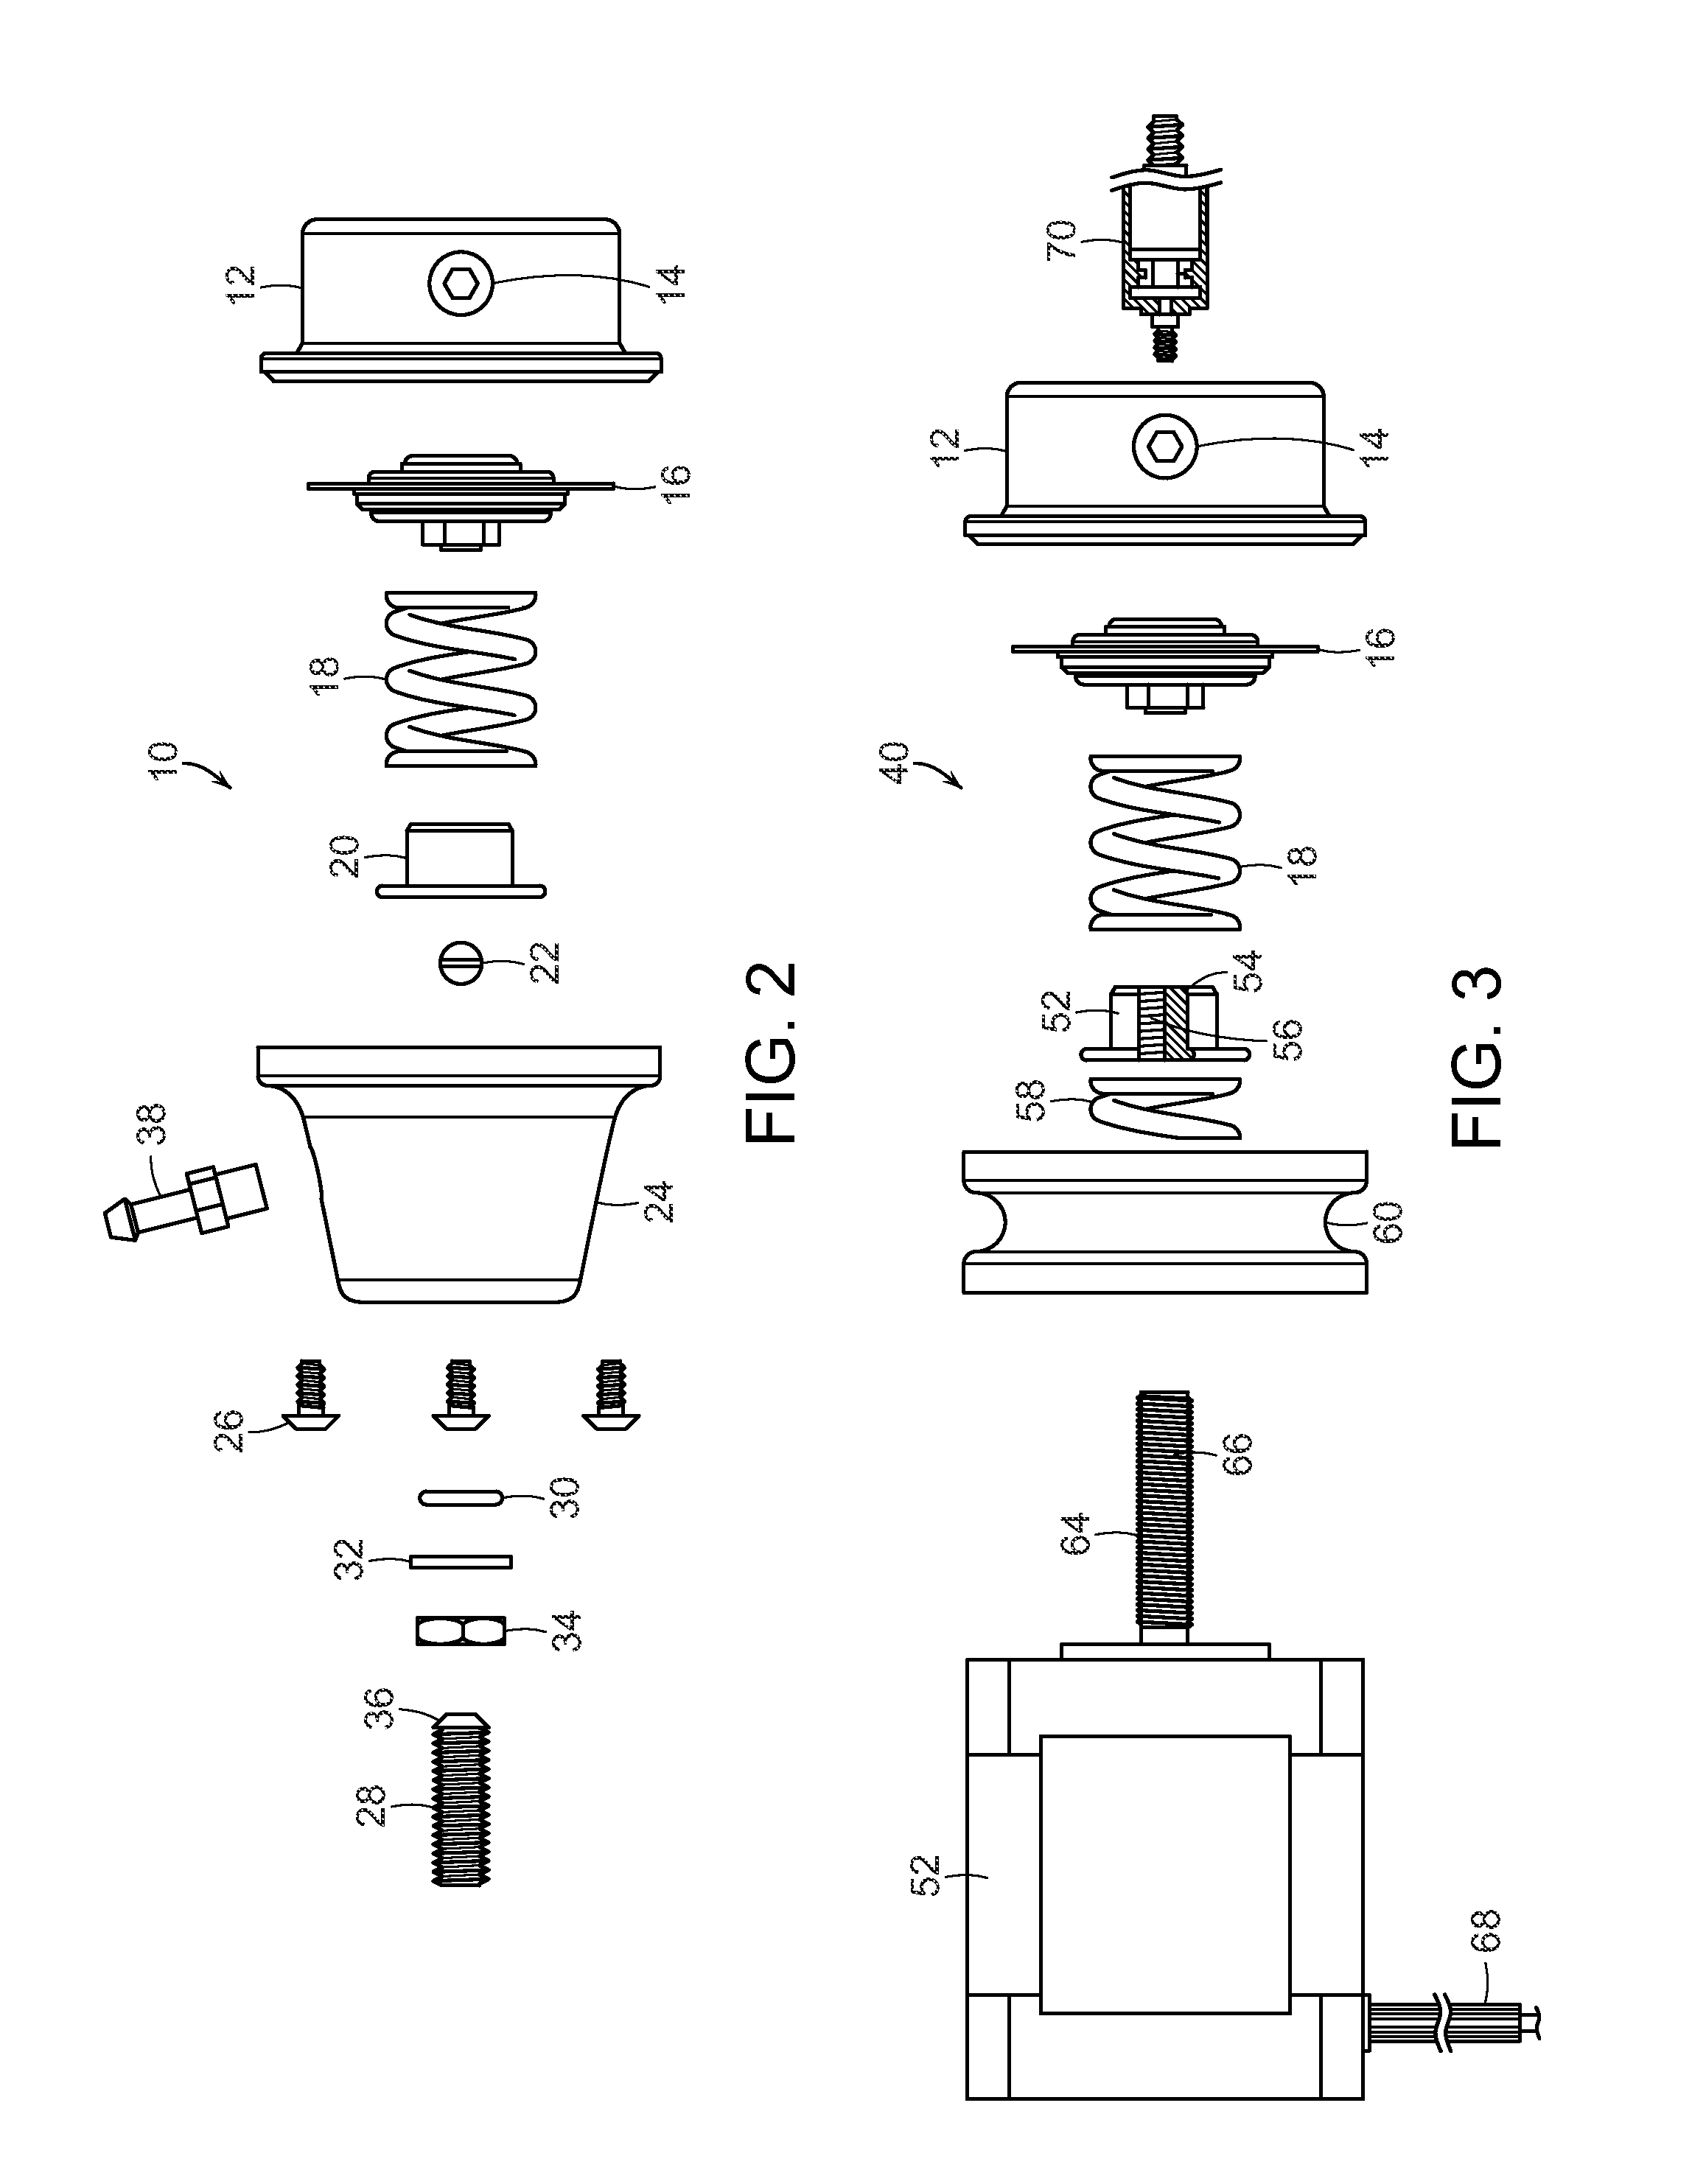 Fuel pressure control system for an internal combustion engine